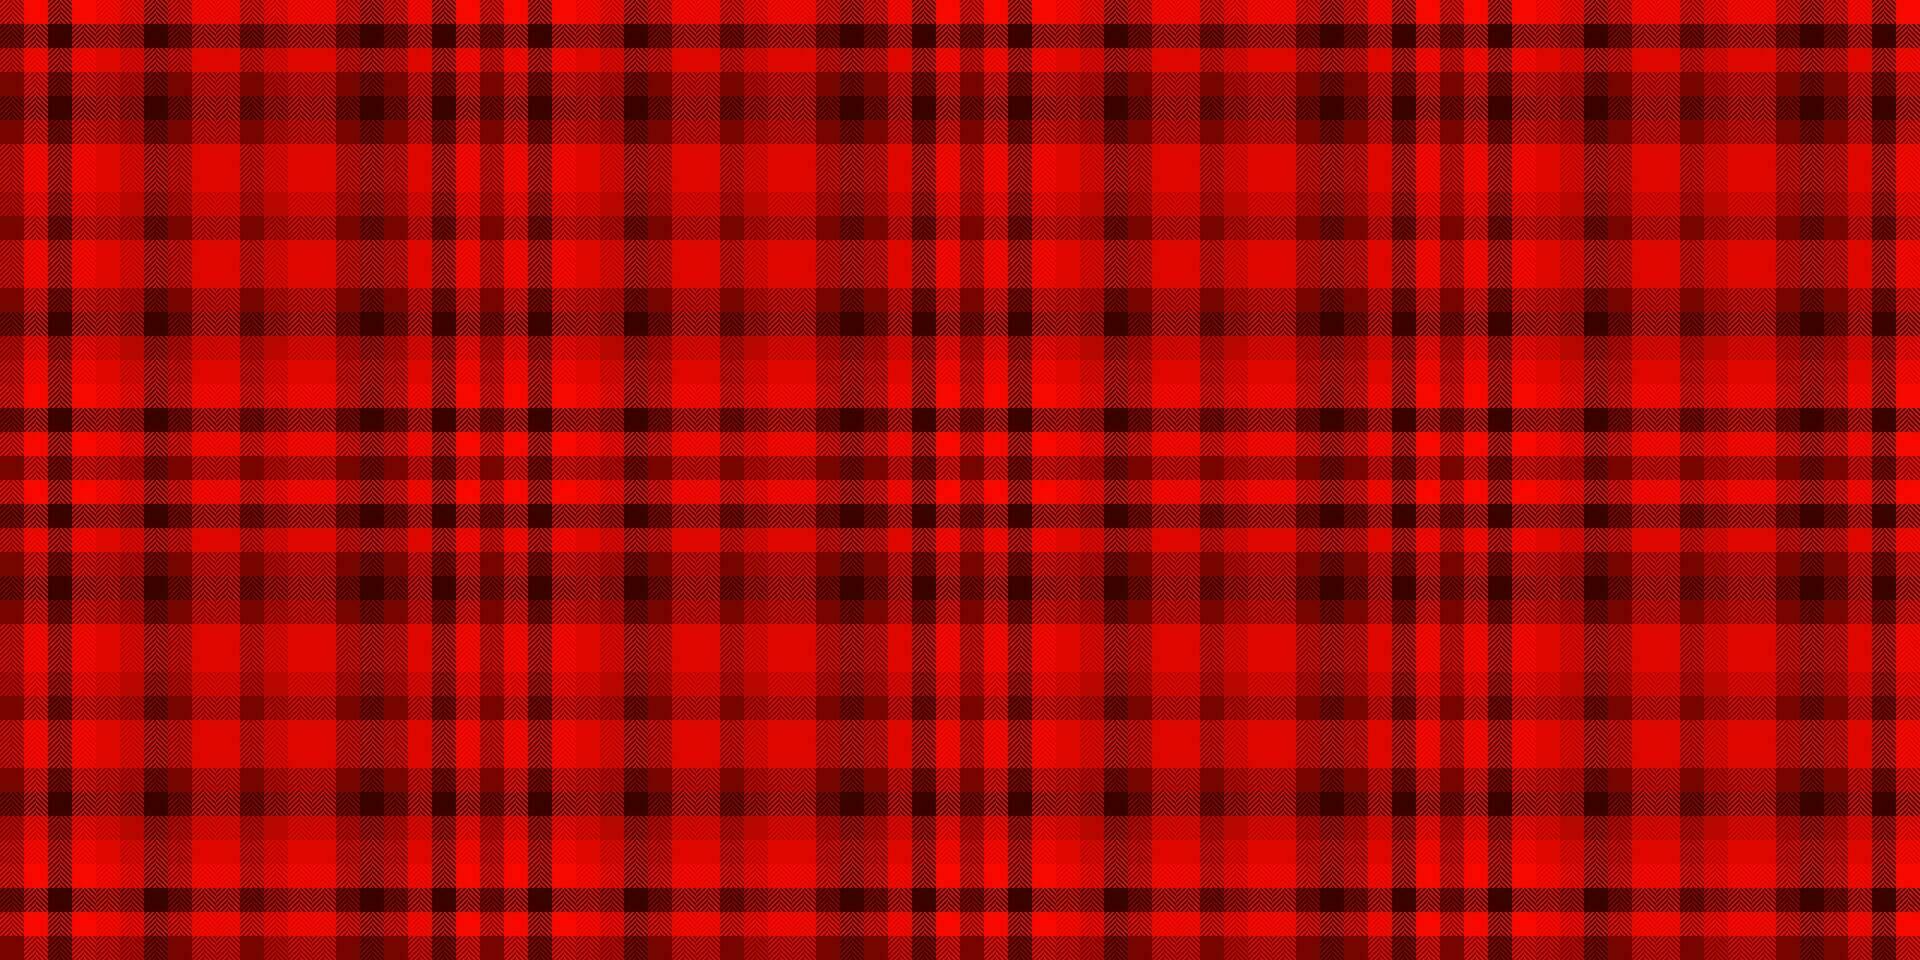 Neat fabric tartan textile, attire vector seamless background. Hotel pattern plaid texture check in red and dark colors.